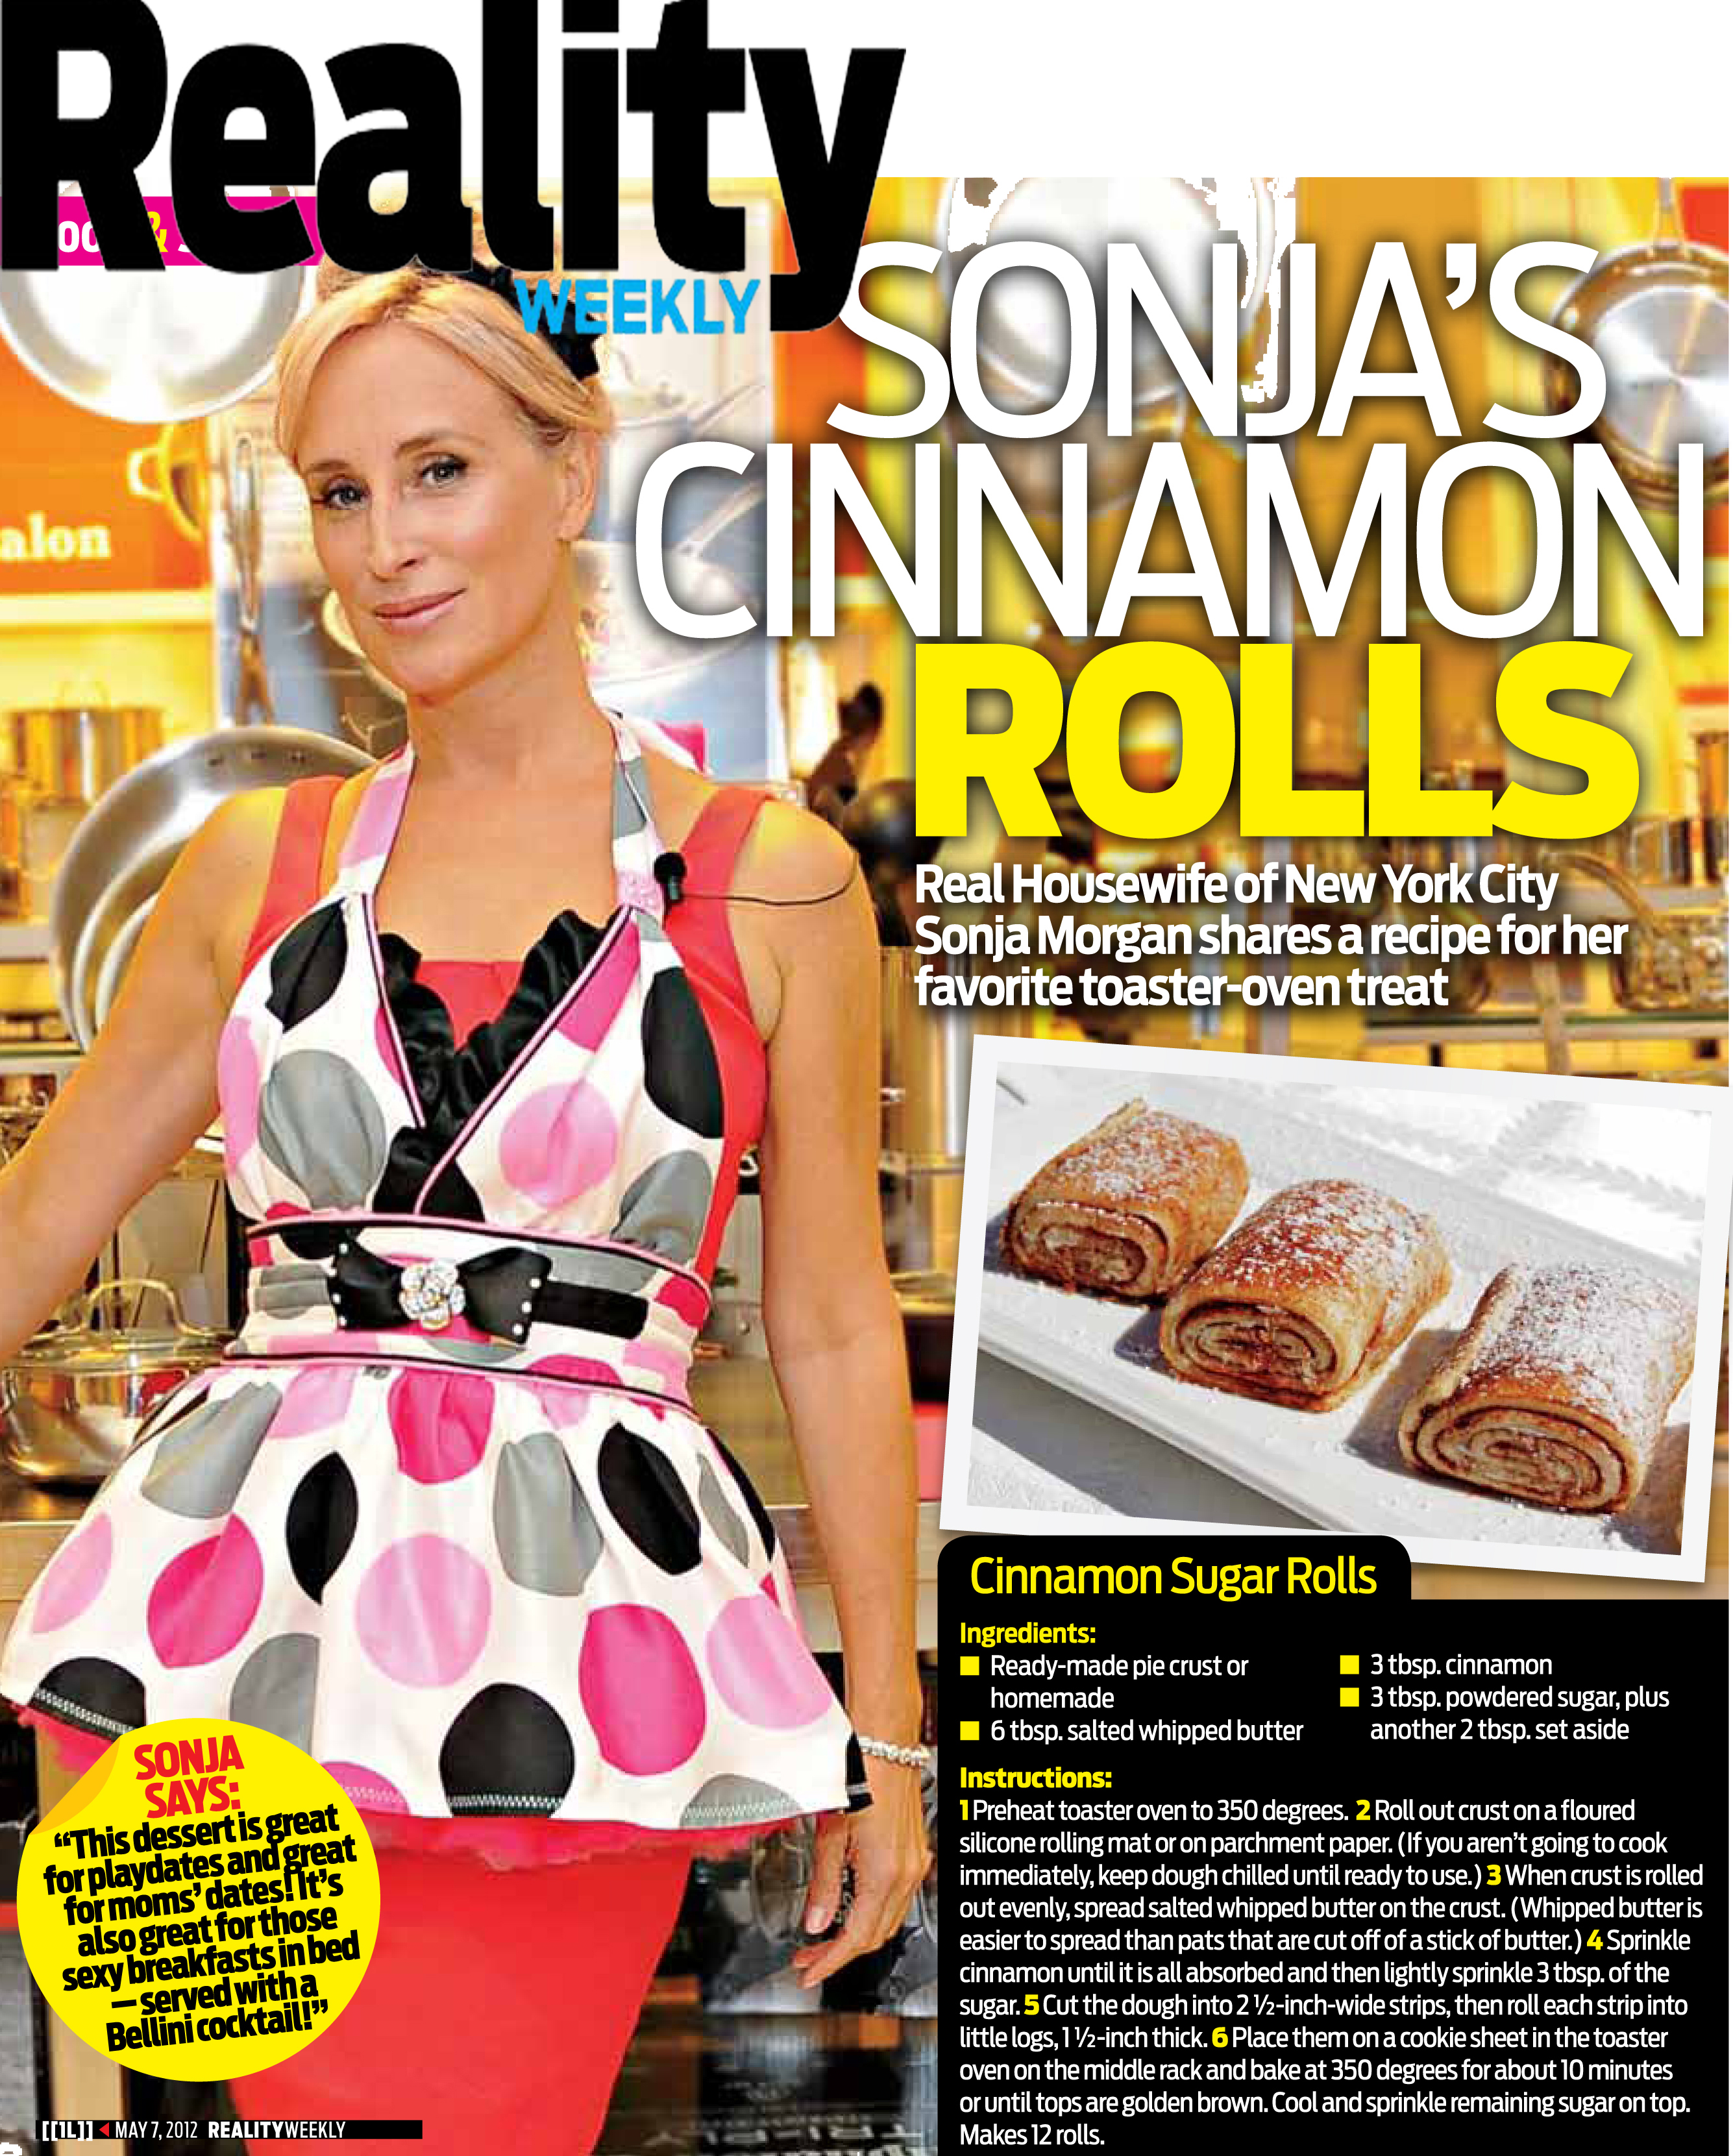 Sonja Morgan being featured in Reality Weekly to discuss her cinnamon rolls.